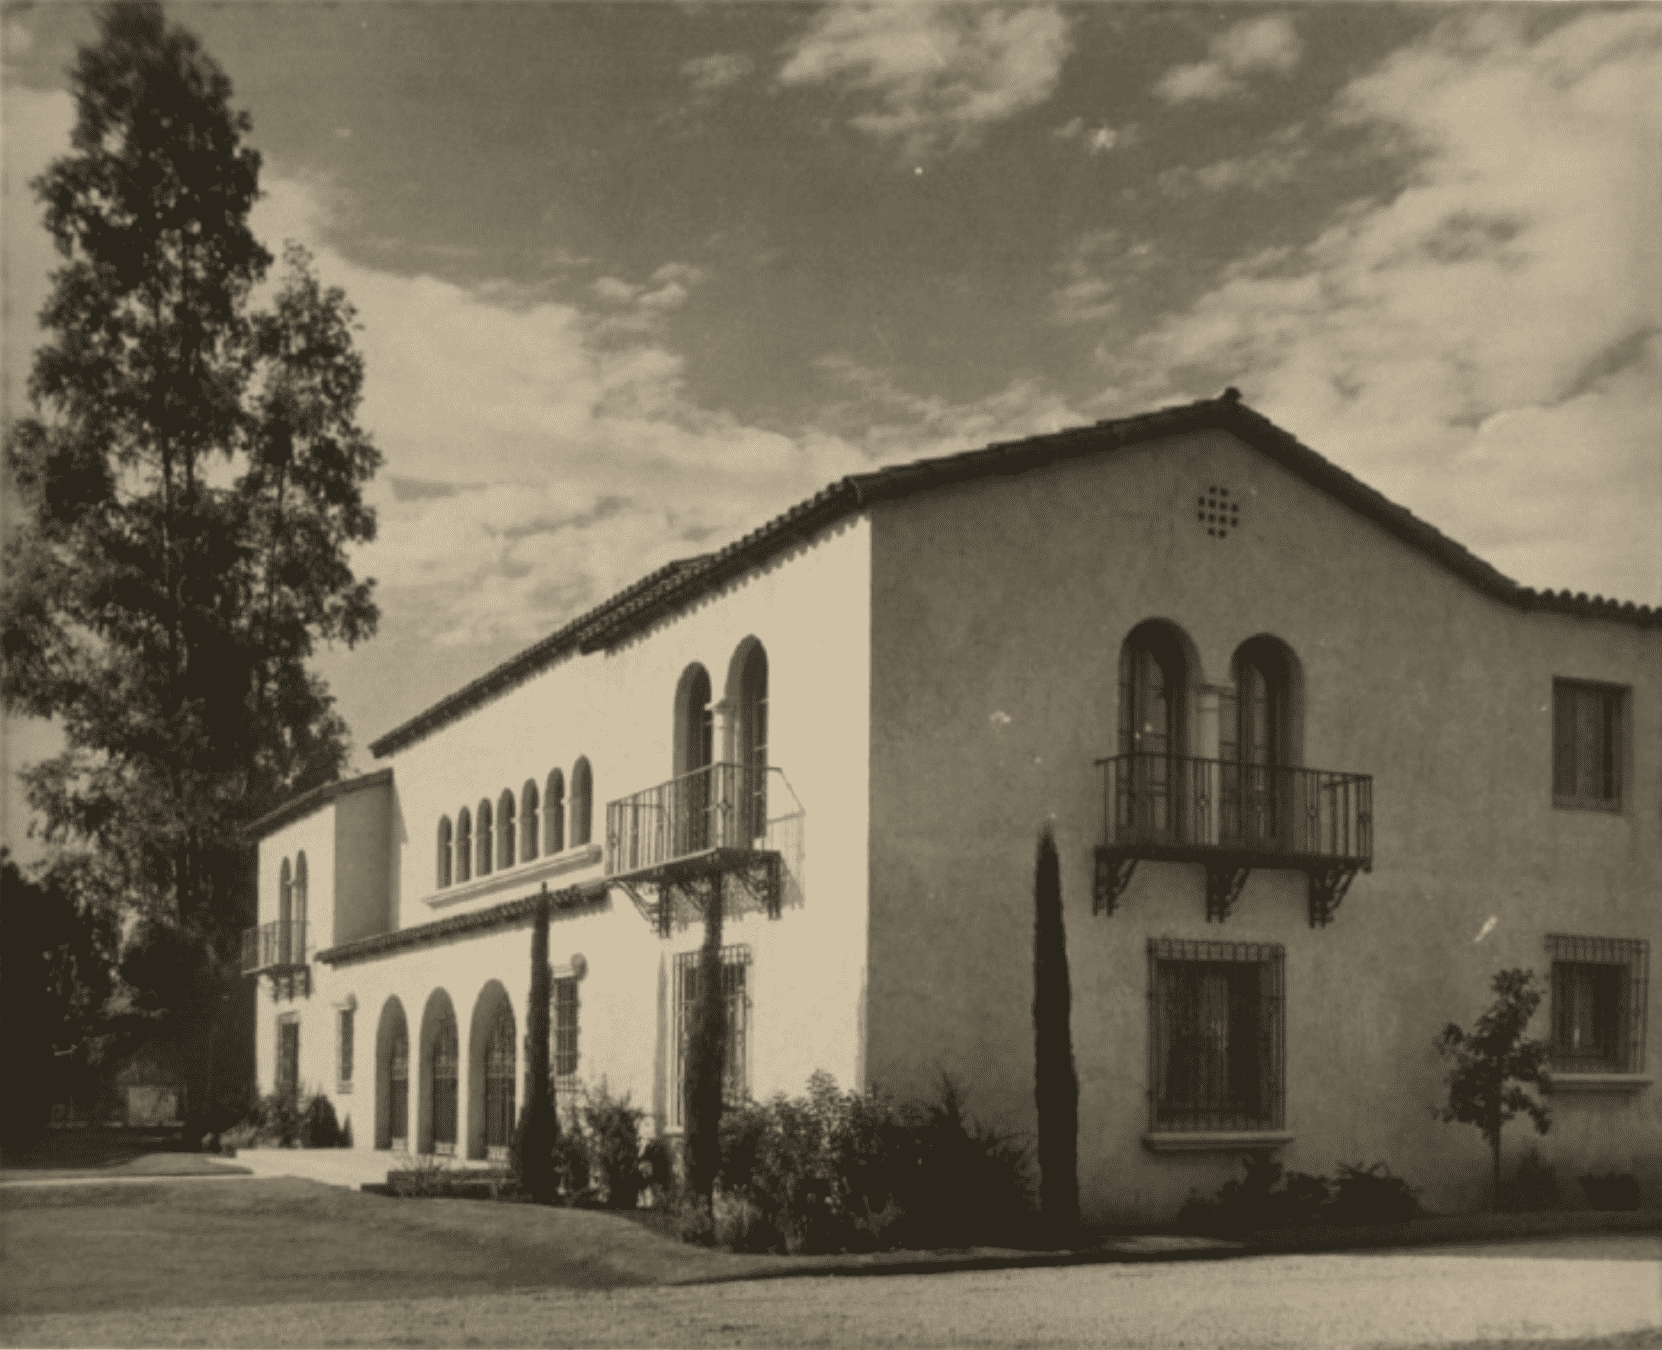 An old black and white photo of a building.